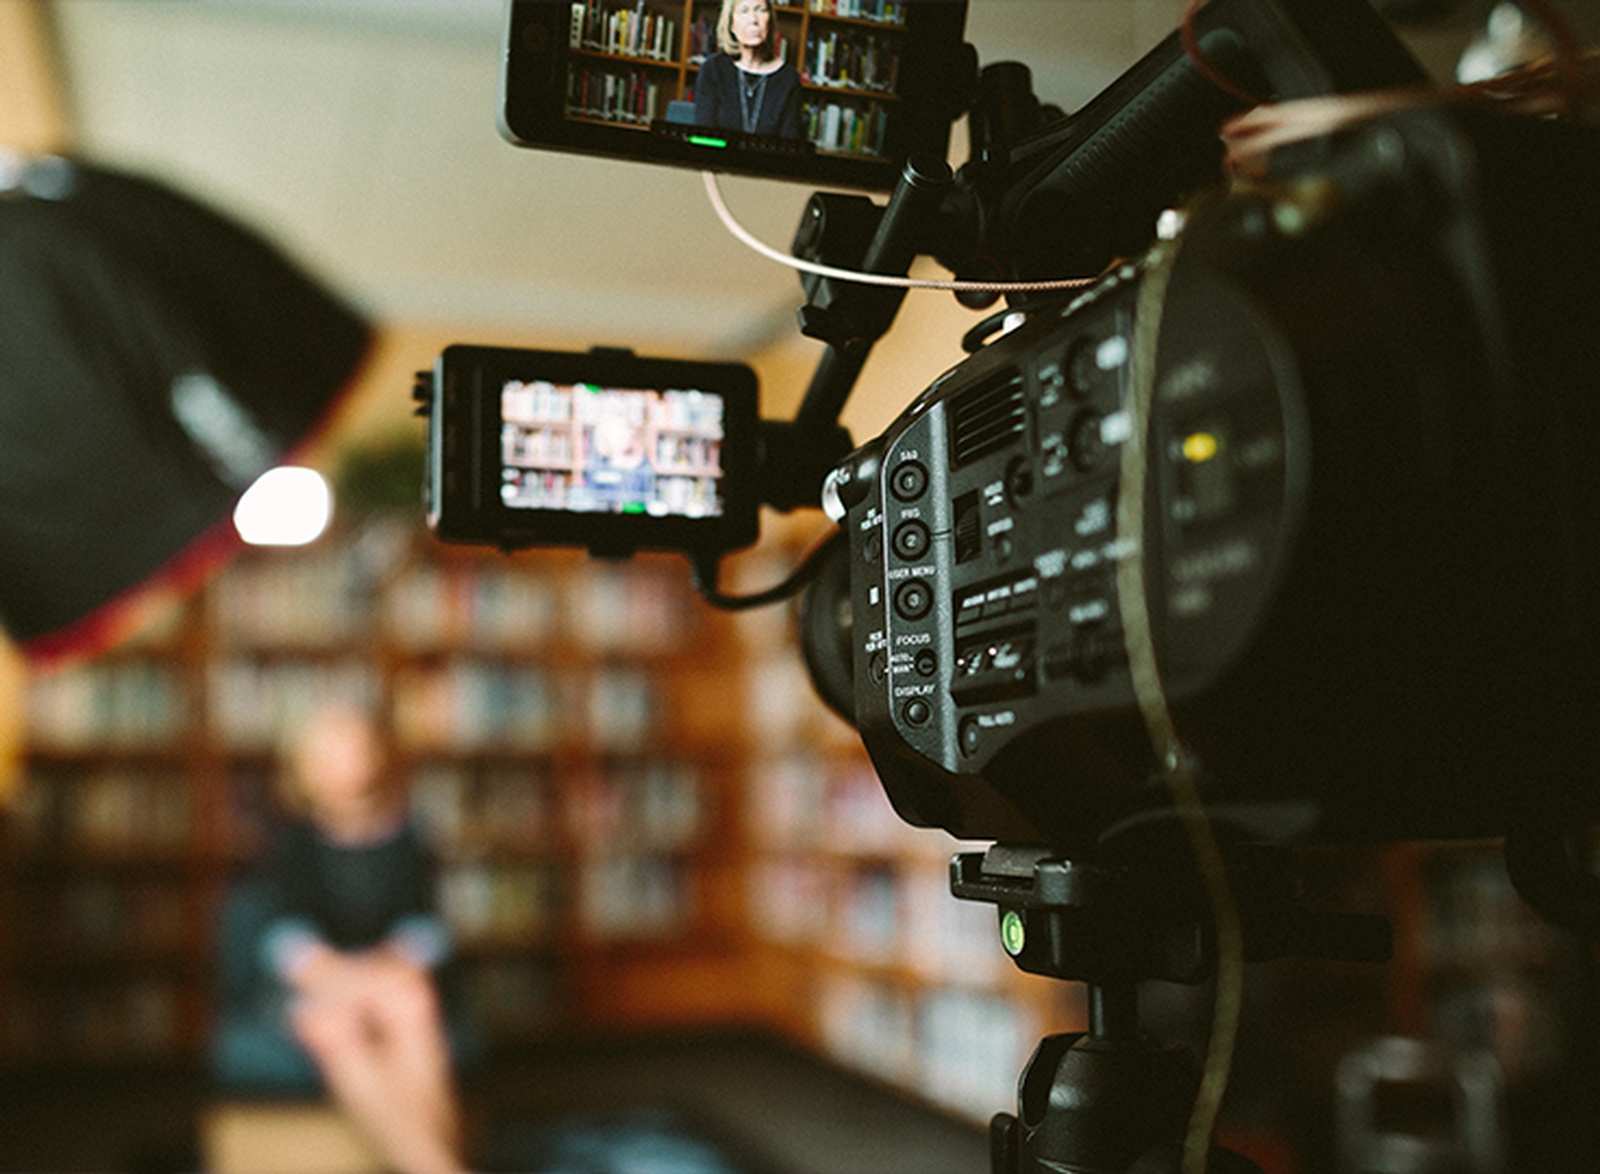 Corporate Video Production & Video Marketing for Businesses in Troy, Michigan